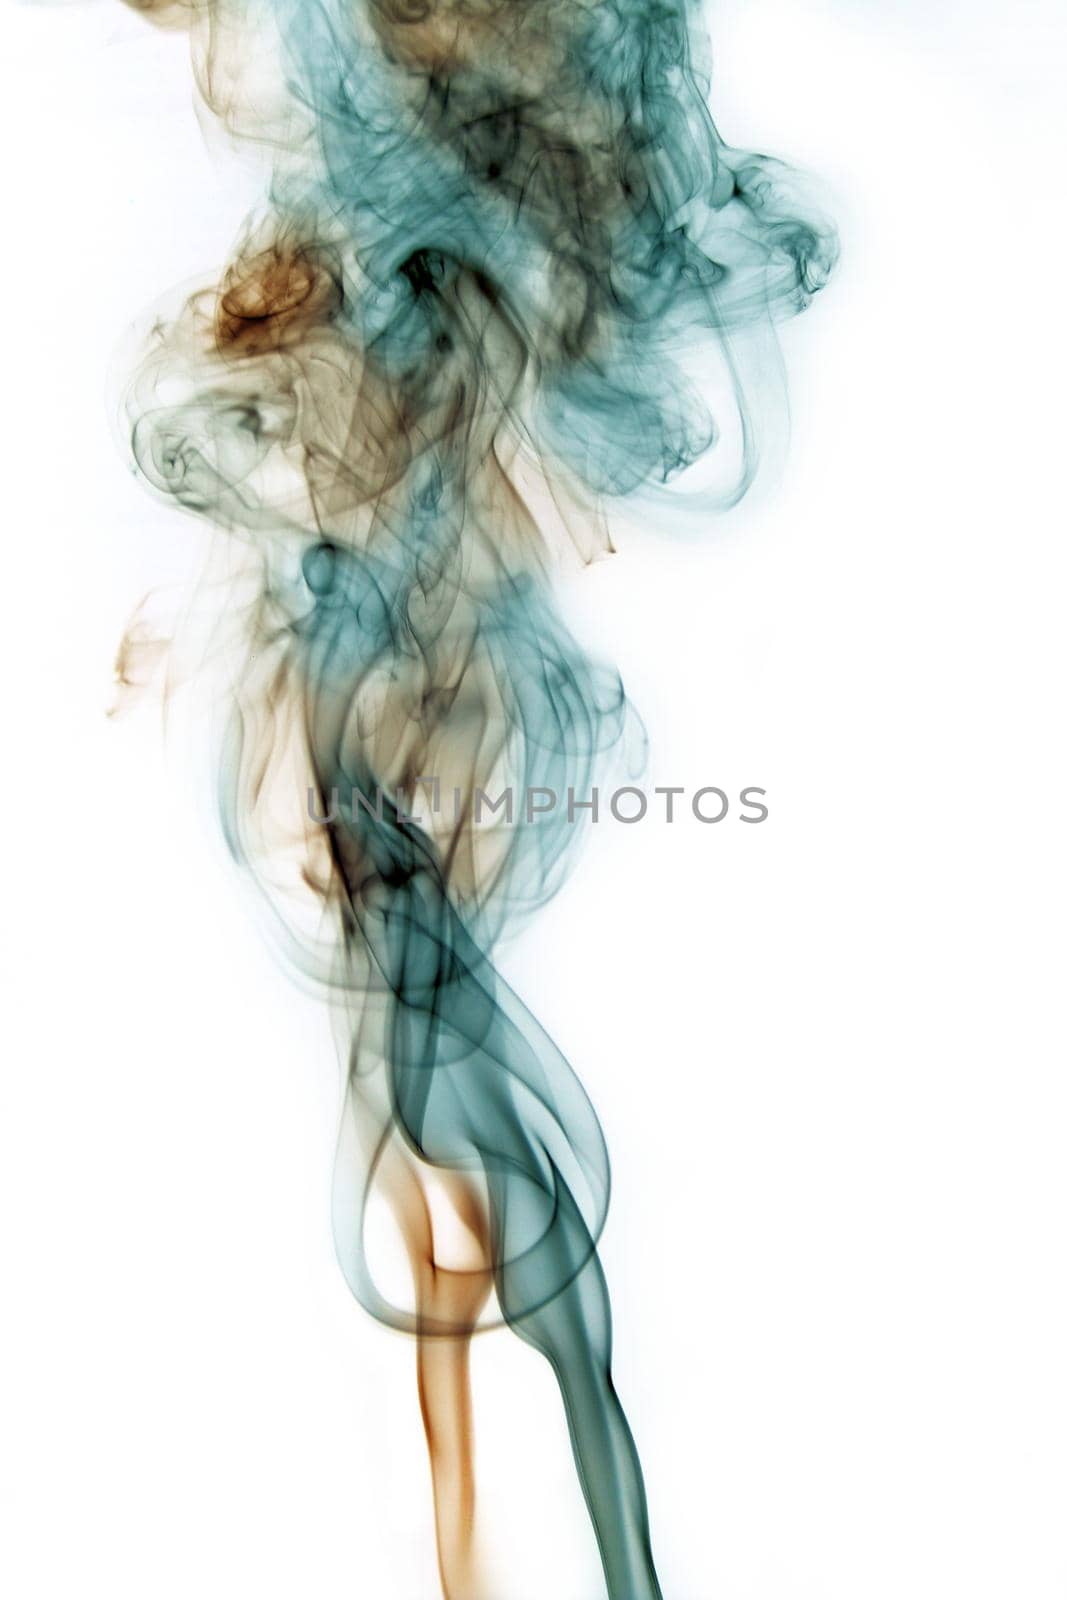 Image of Orange and teal smoke twisting together and mixing on a white background